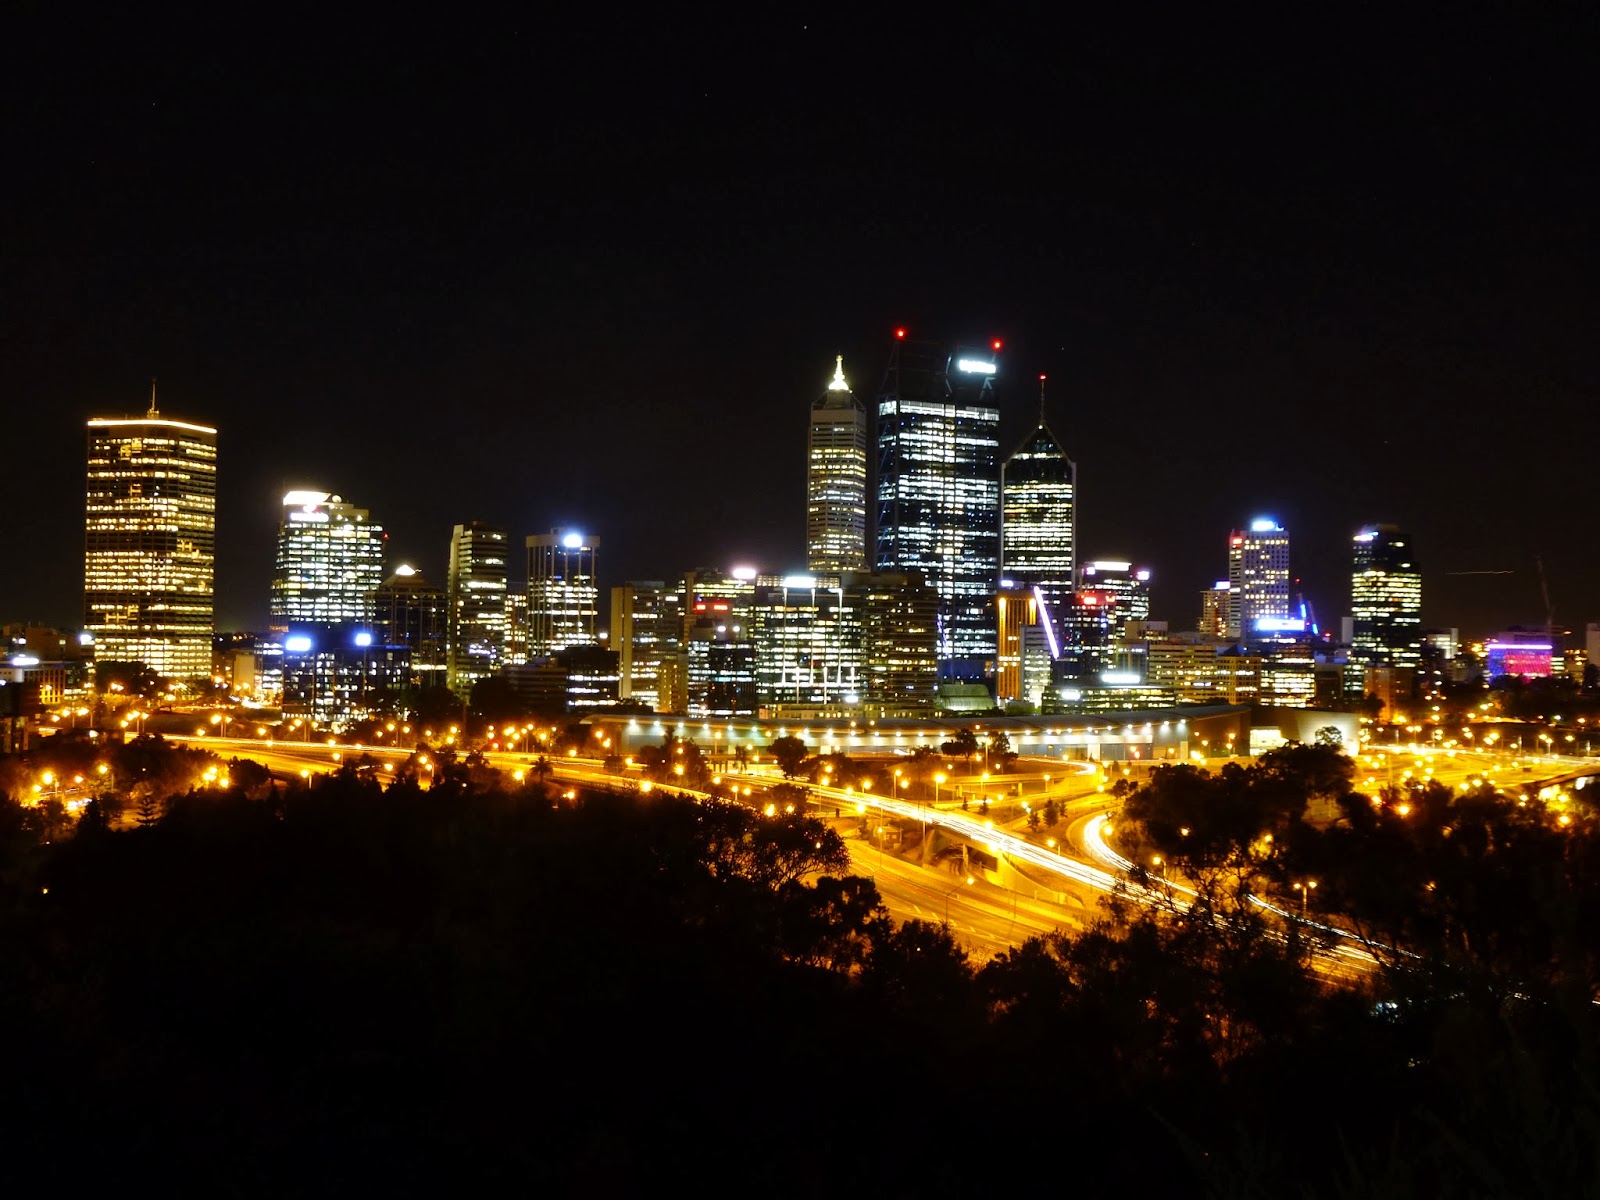 Perth City at night, looking from Kings Park | 'Over the hill' and ...